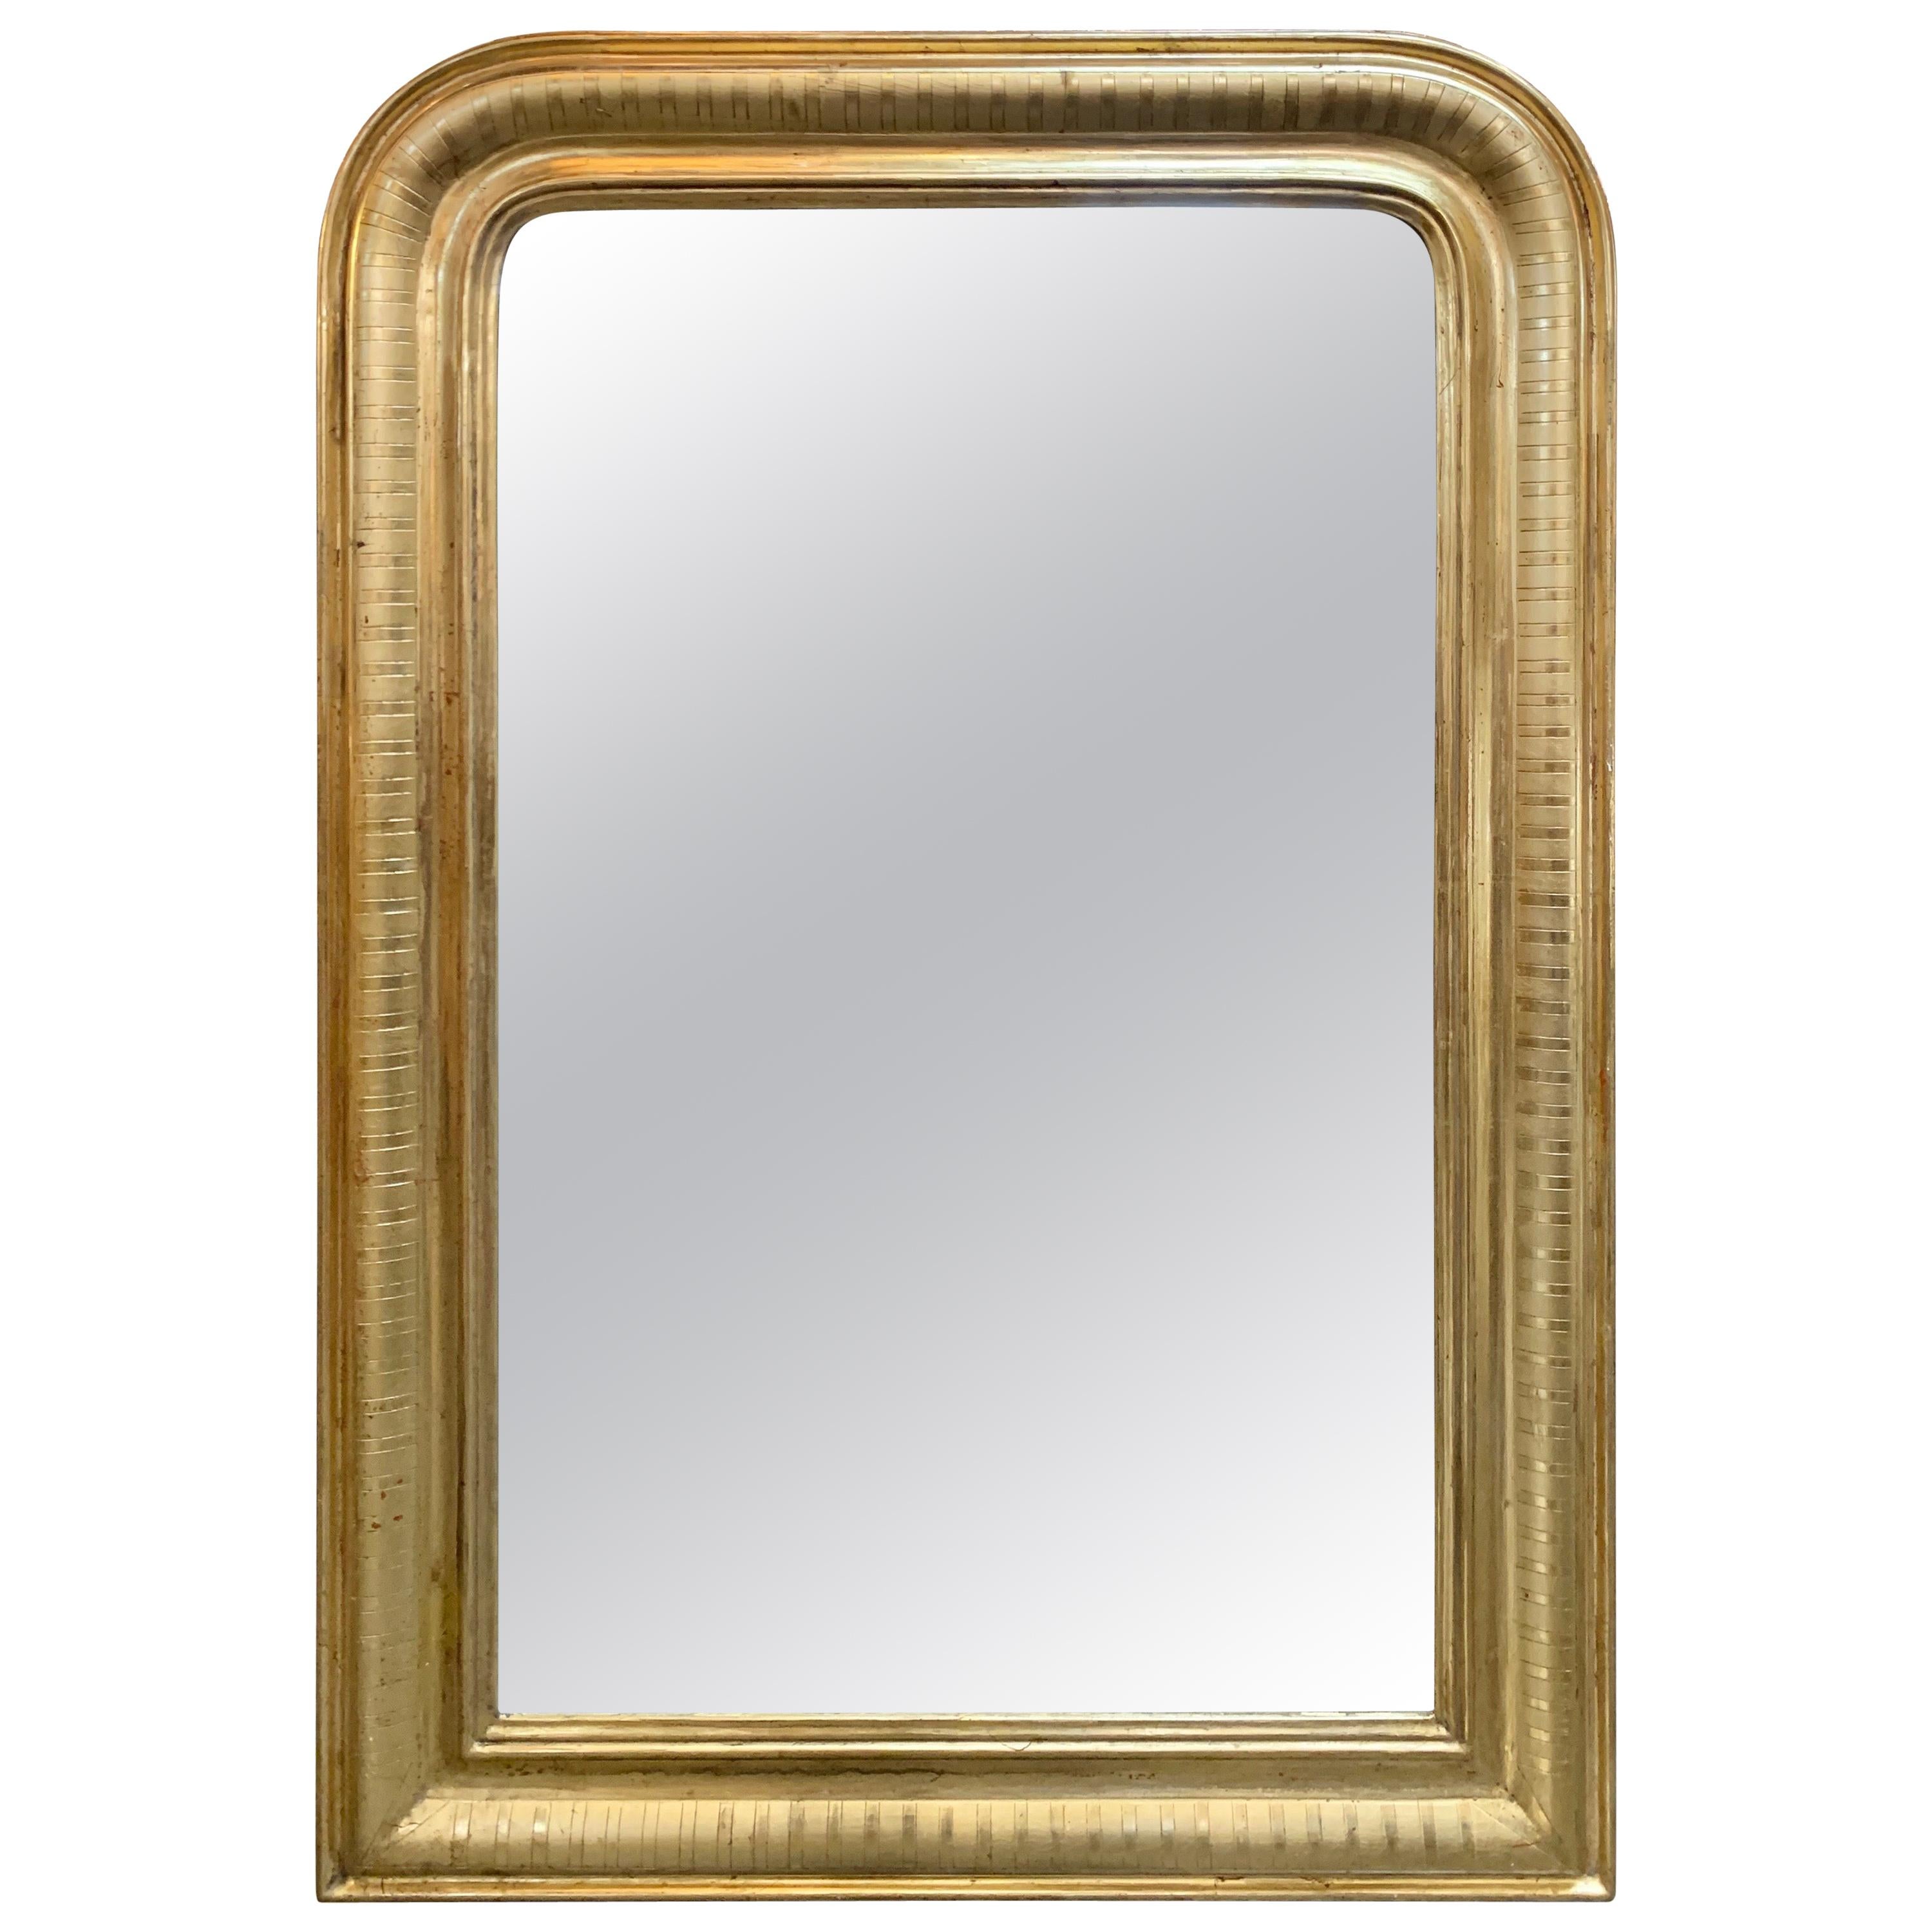 19th Century Louis Philippe Mirror with Gold Gilt